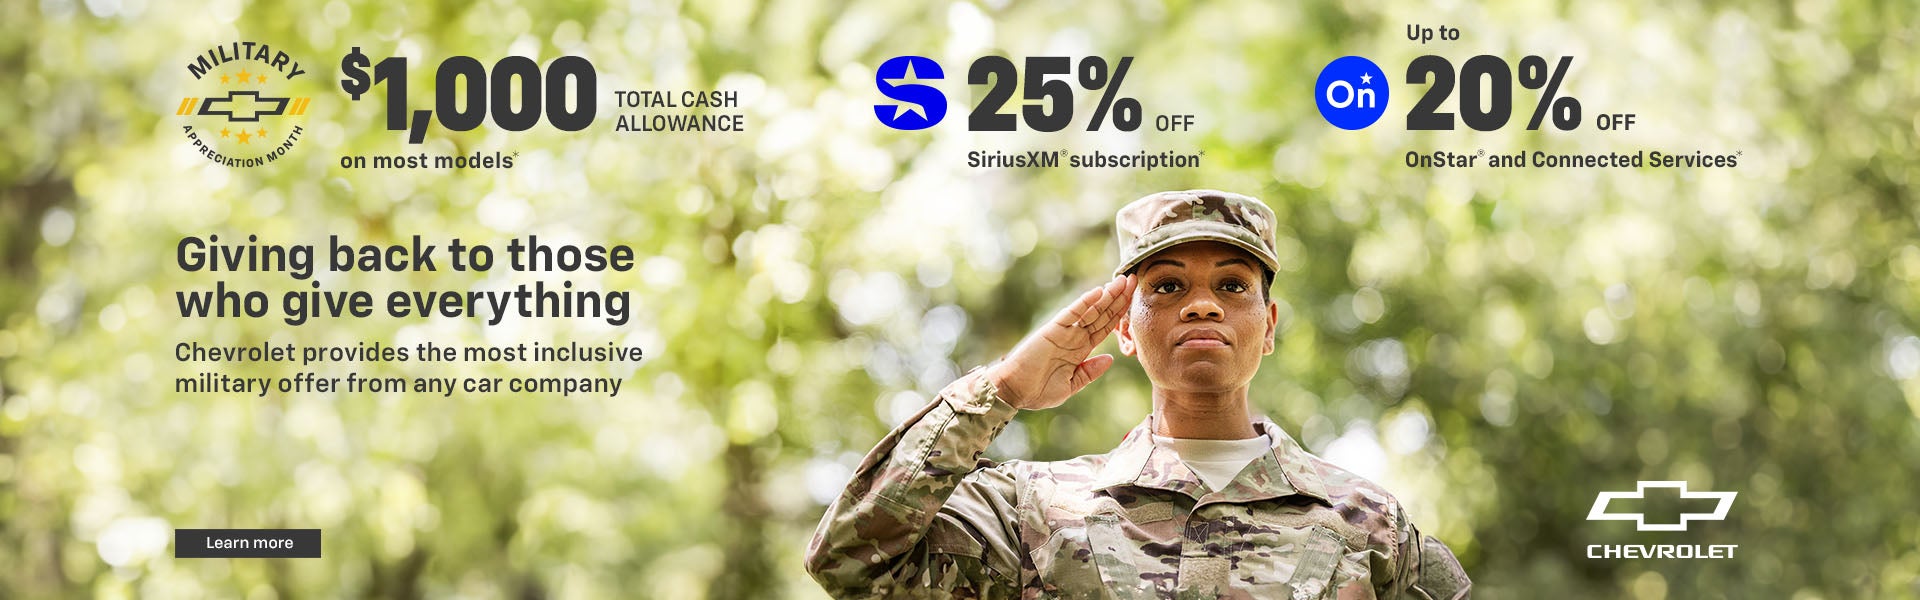 Giving back to those who give everything. Chevrolet offers the most inclusive military offer from...